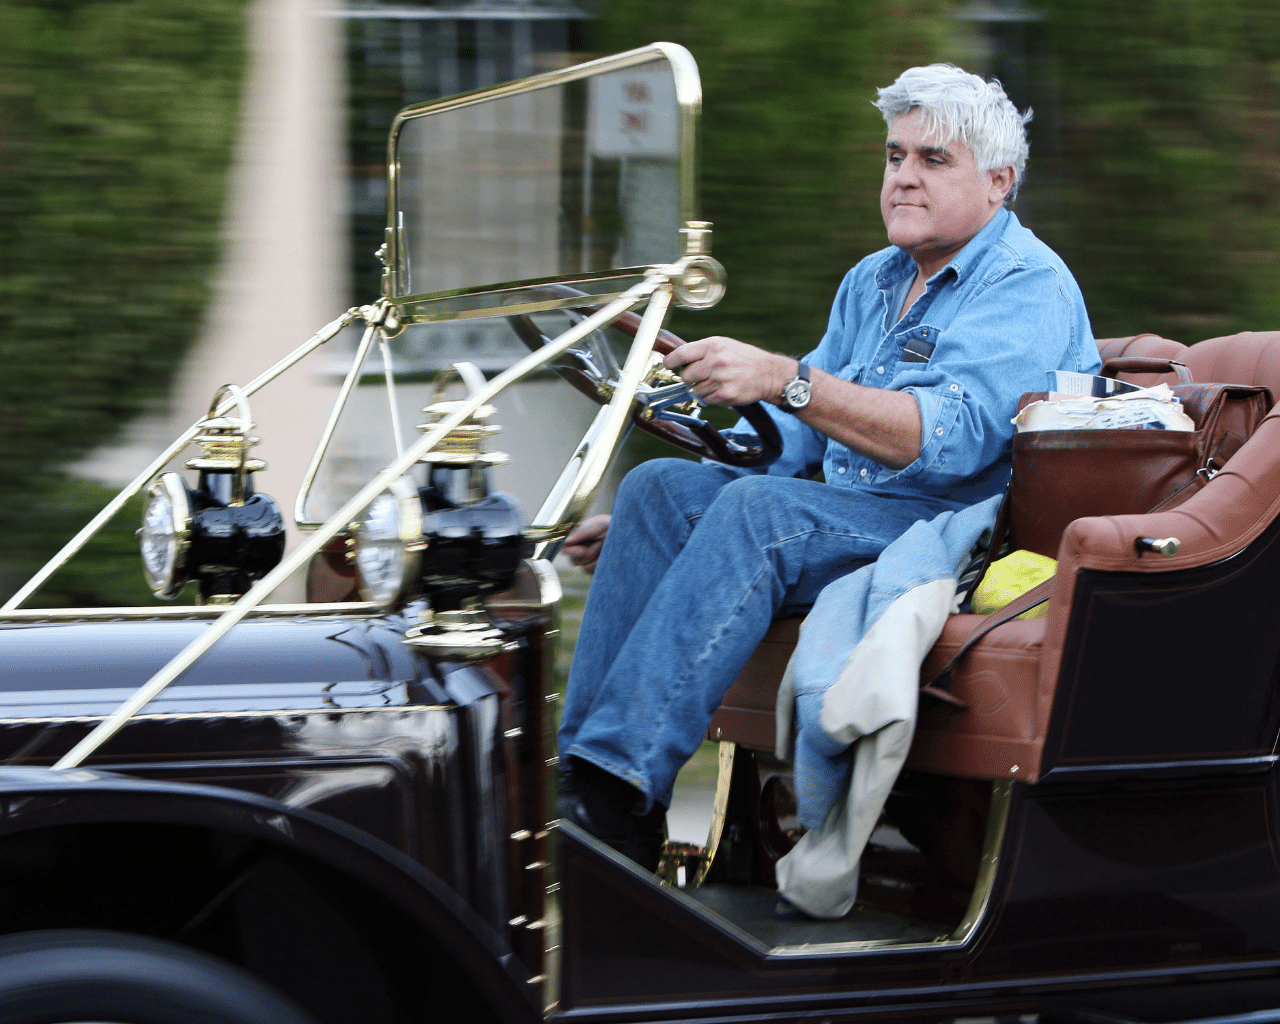 Jay Leno's Garage Advanced Vehicle Care Discount Offer - Shannons Club